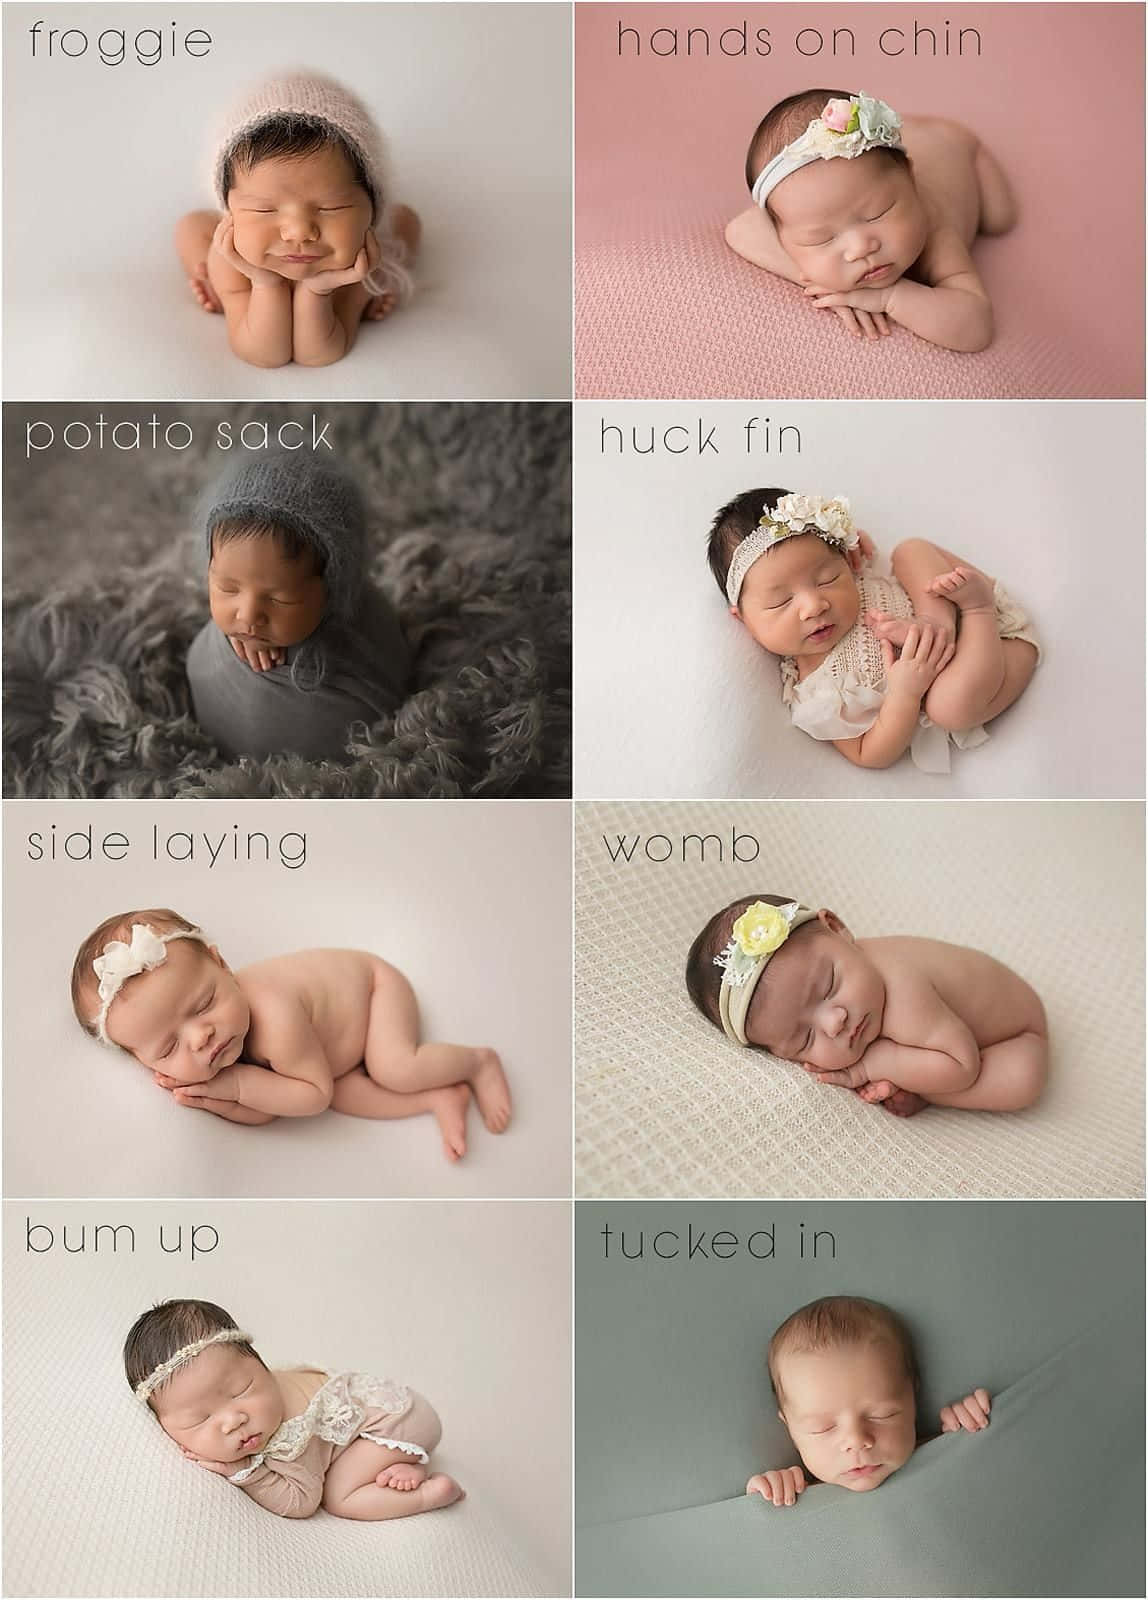 What are the best newborn photography poses for my baby? | Artin Photography